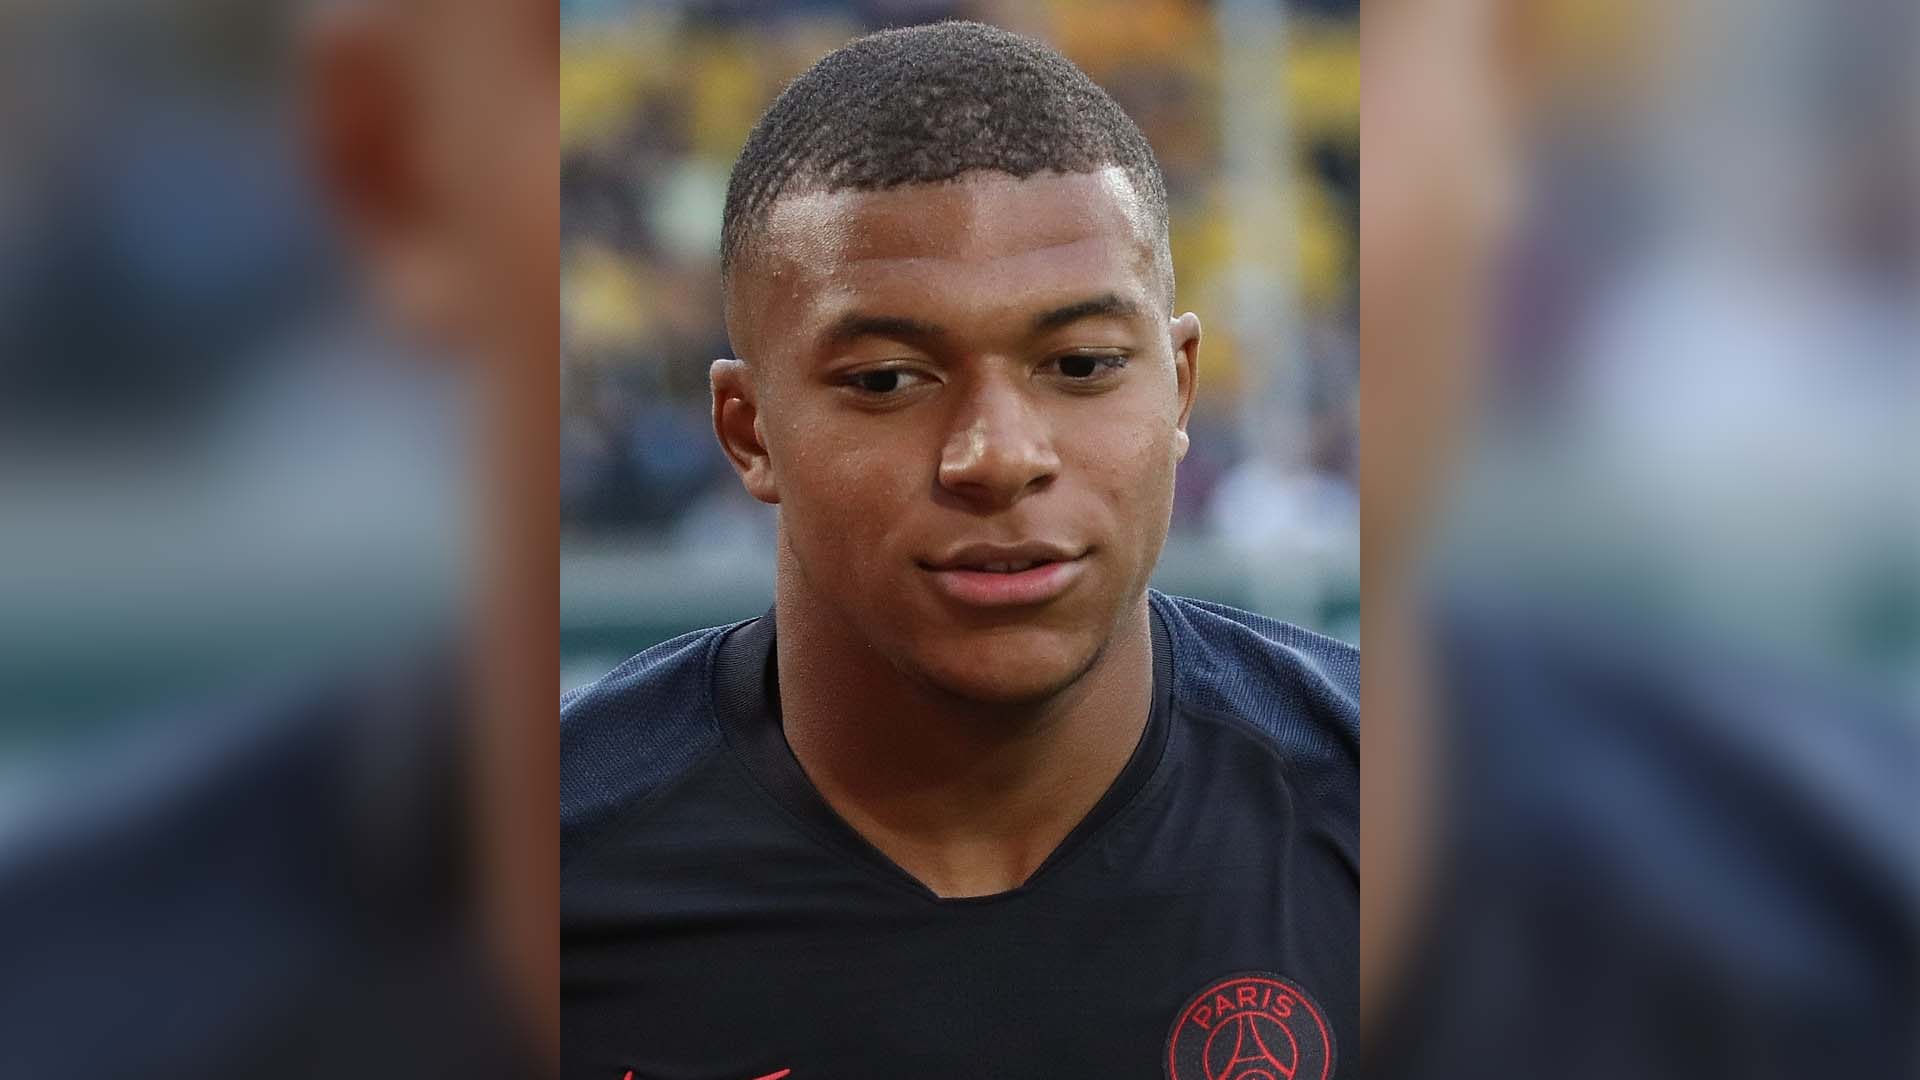 Mbappé scores as PSG beats Nice 3-1 to reach French Cup semifinals